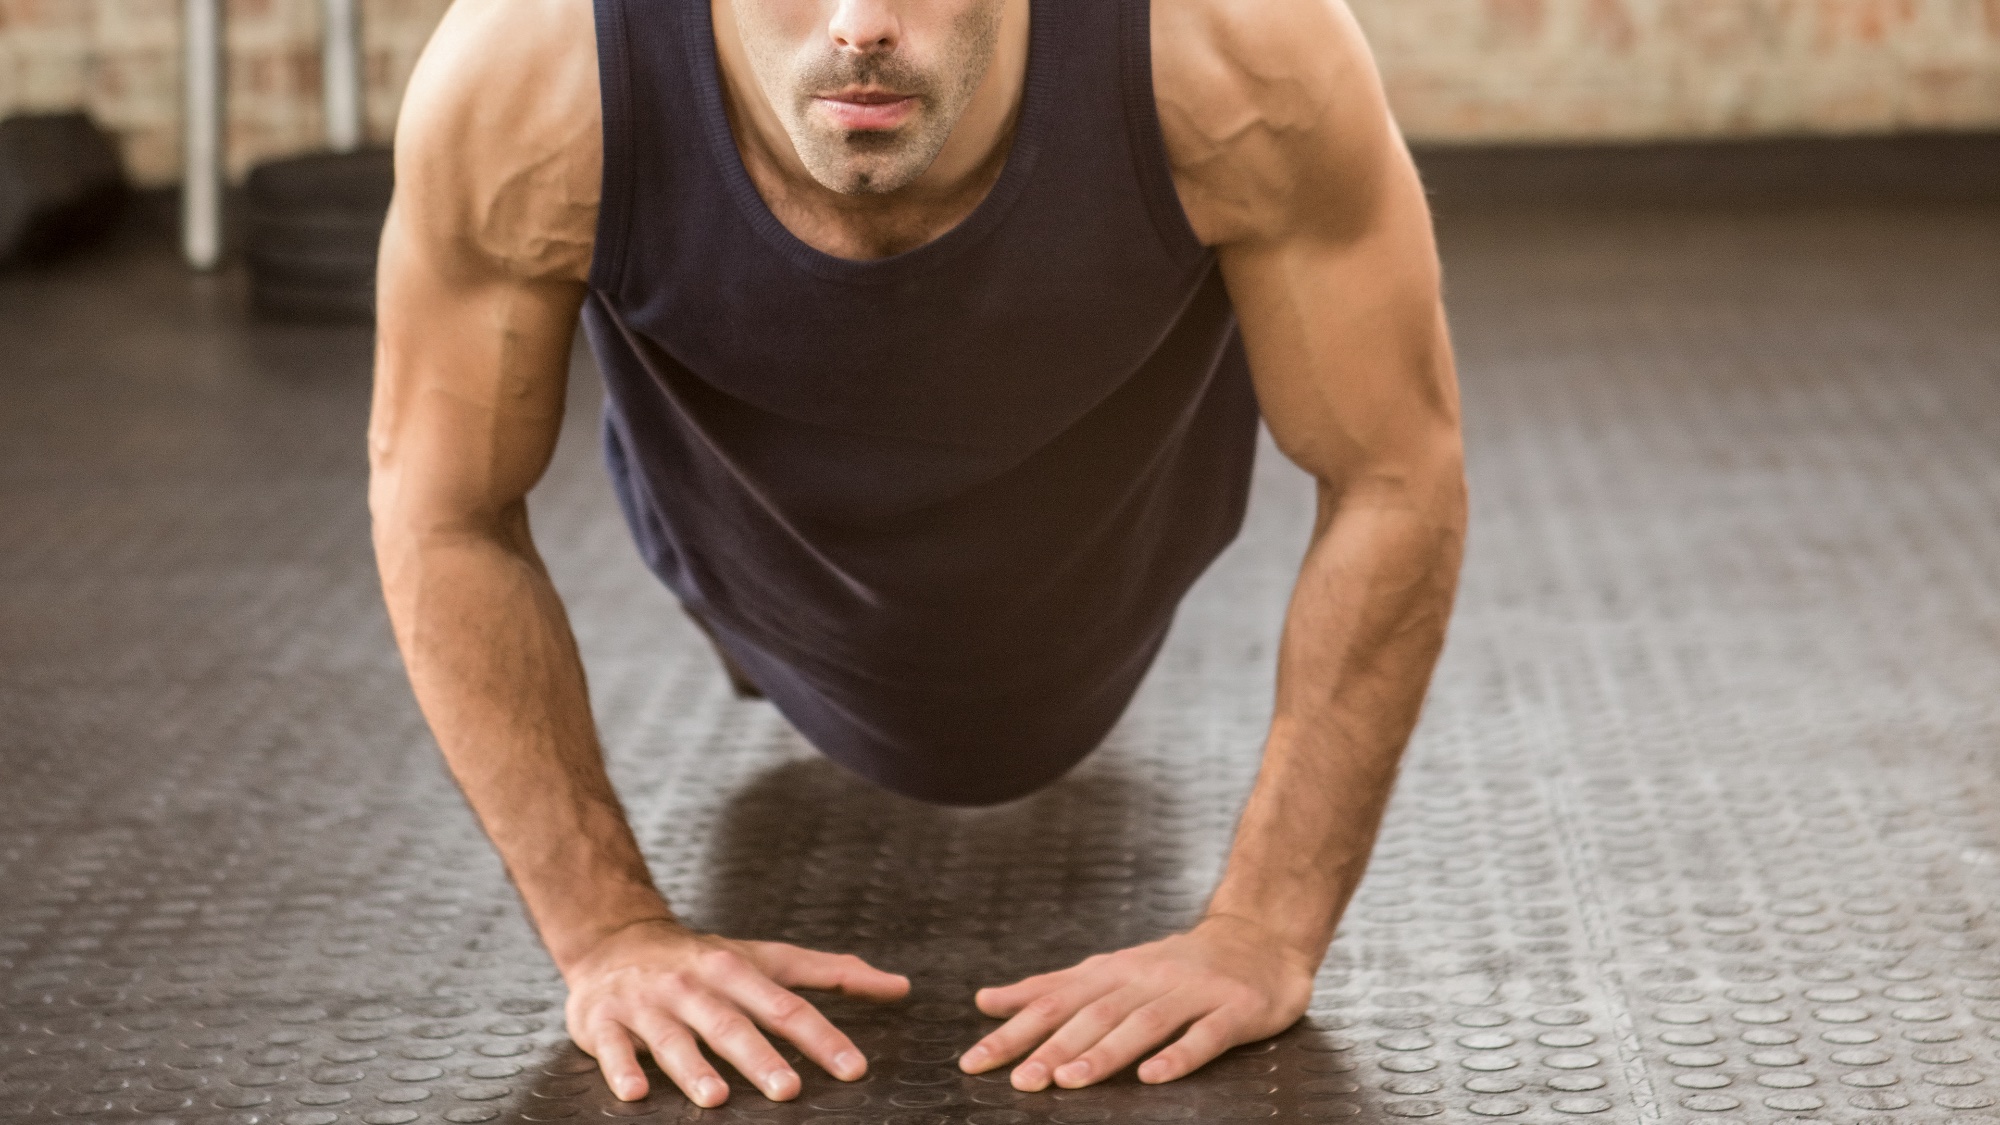 Workout of the Month - Arm Slide Push-Up